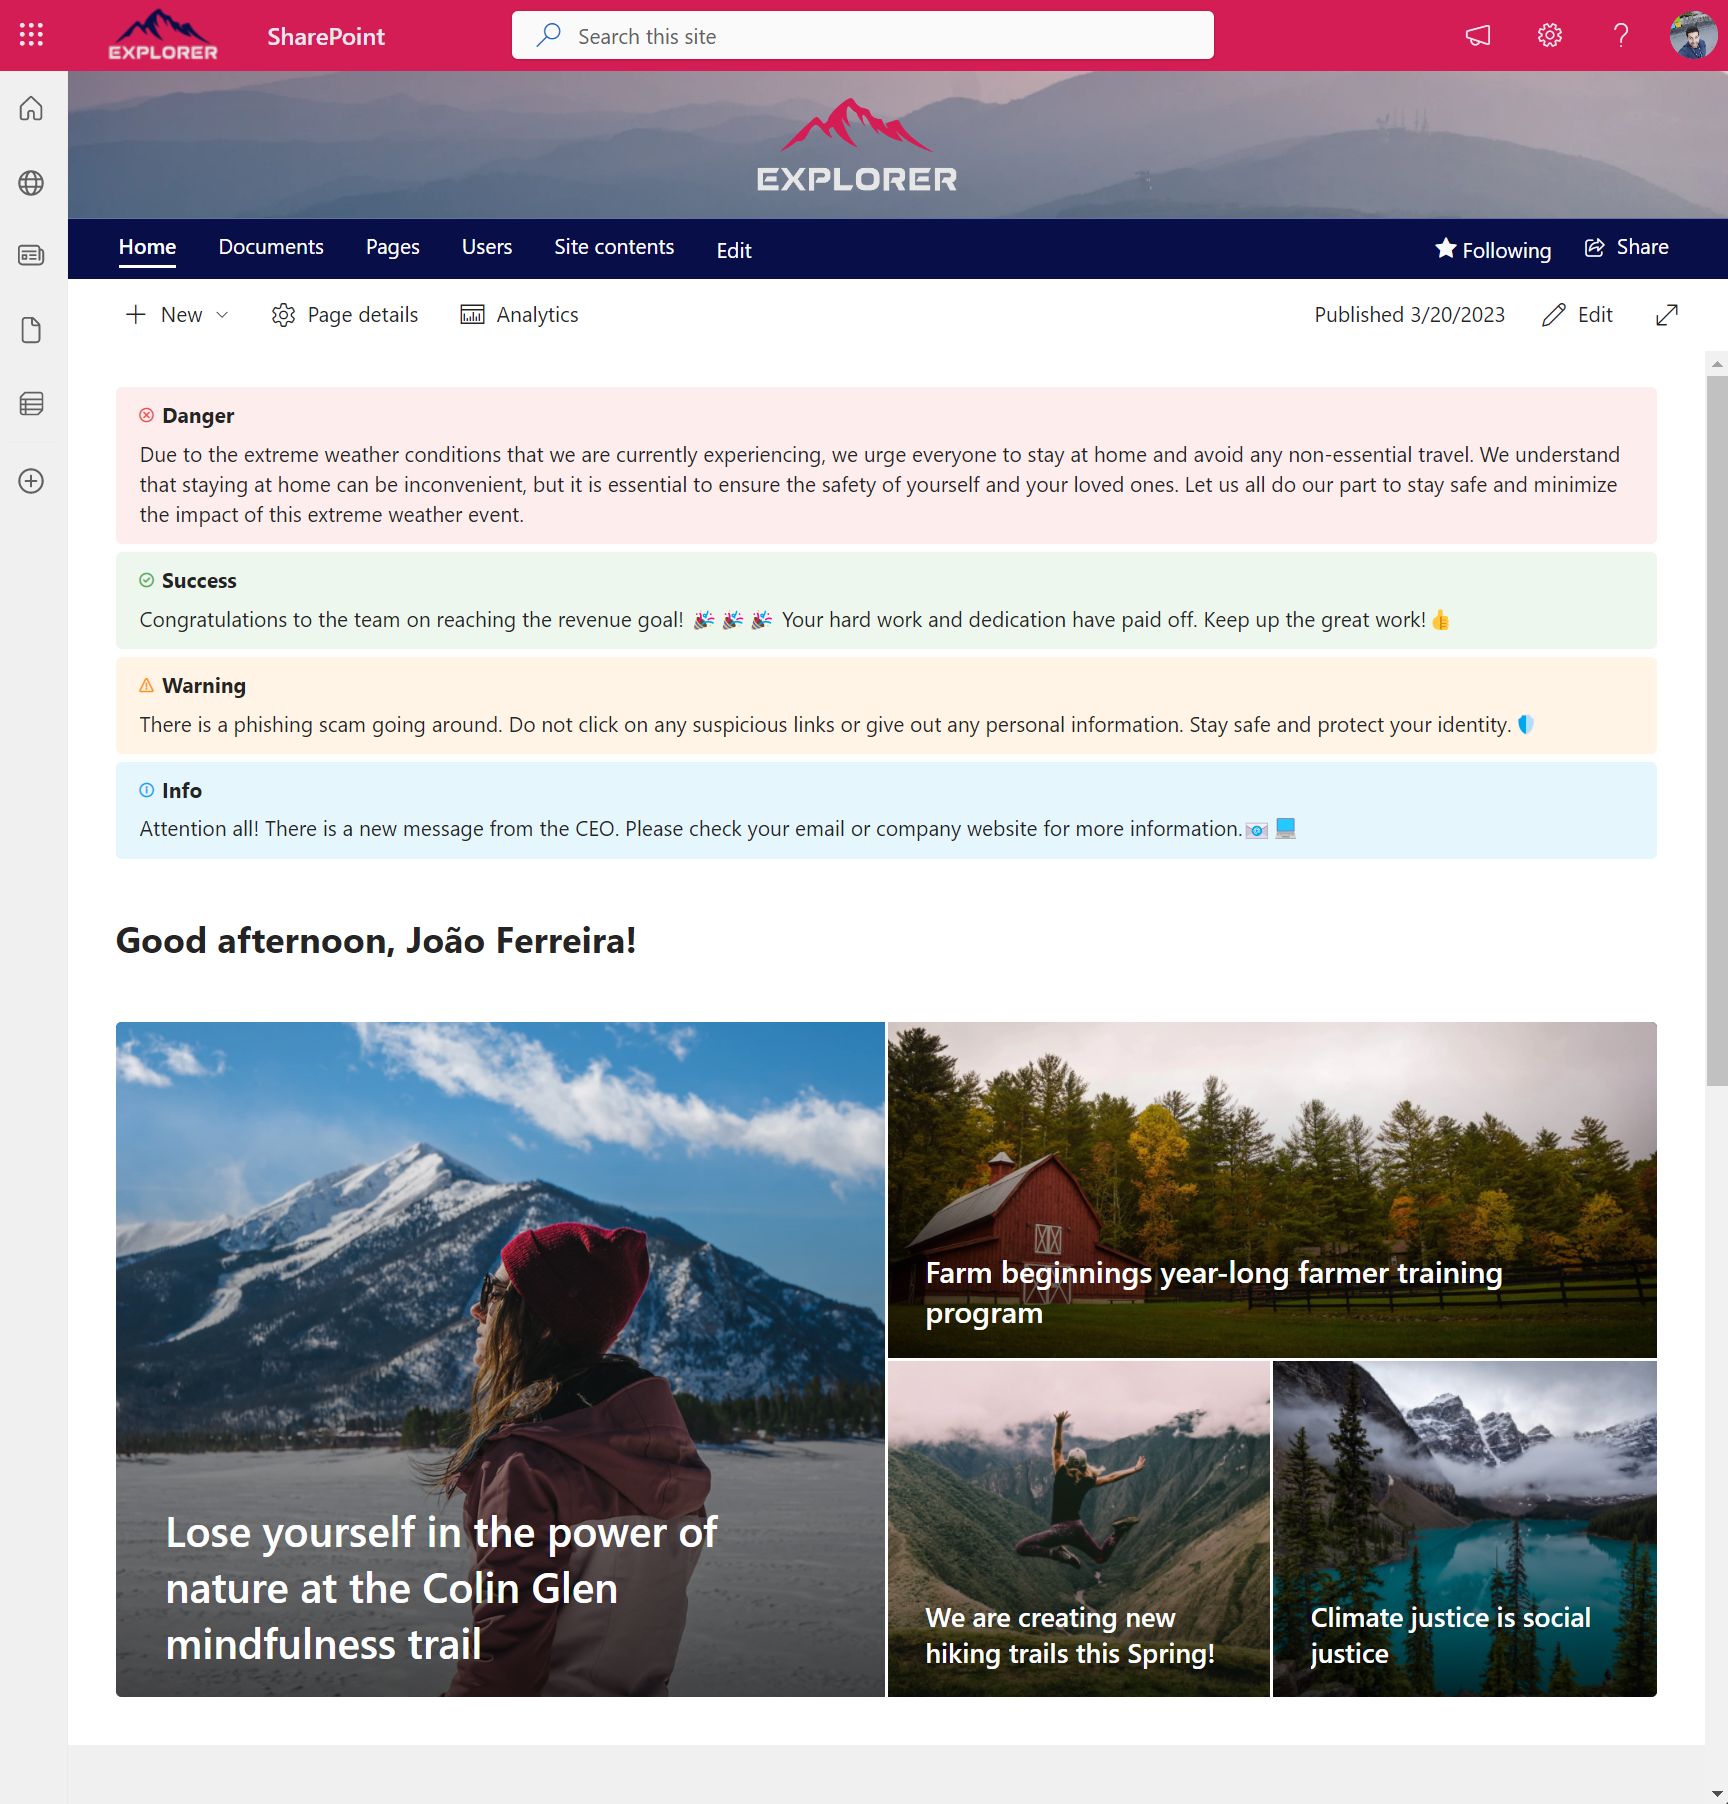 Building a SharePoint intranet with ChatGPT and Bing – Announcements and Alerts 